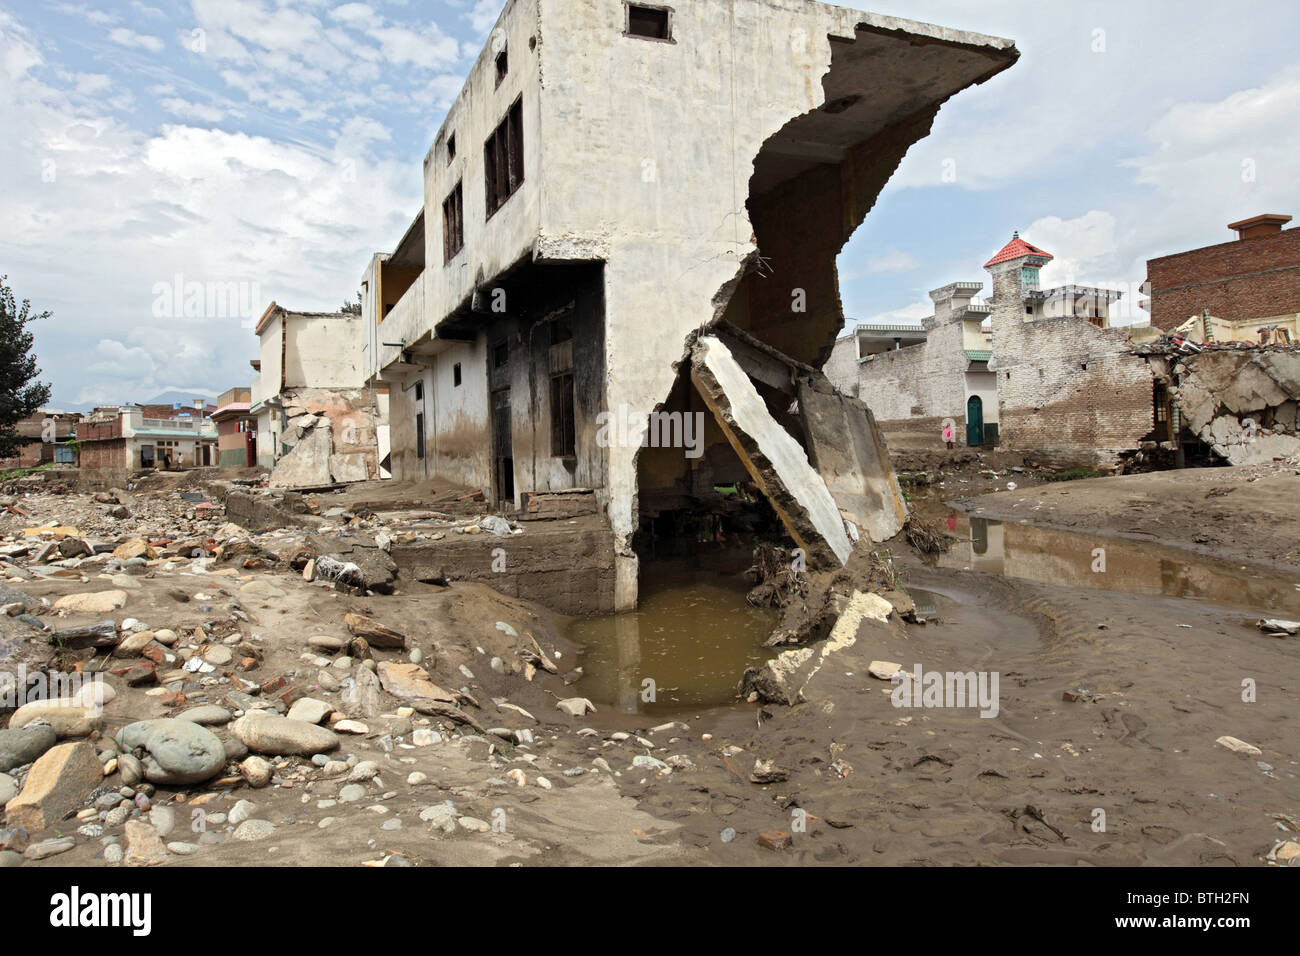 A destroyed house on the banks of River Swat, Mingora, Pakistan Stock Photo